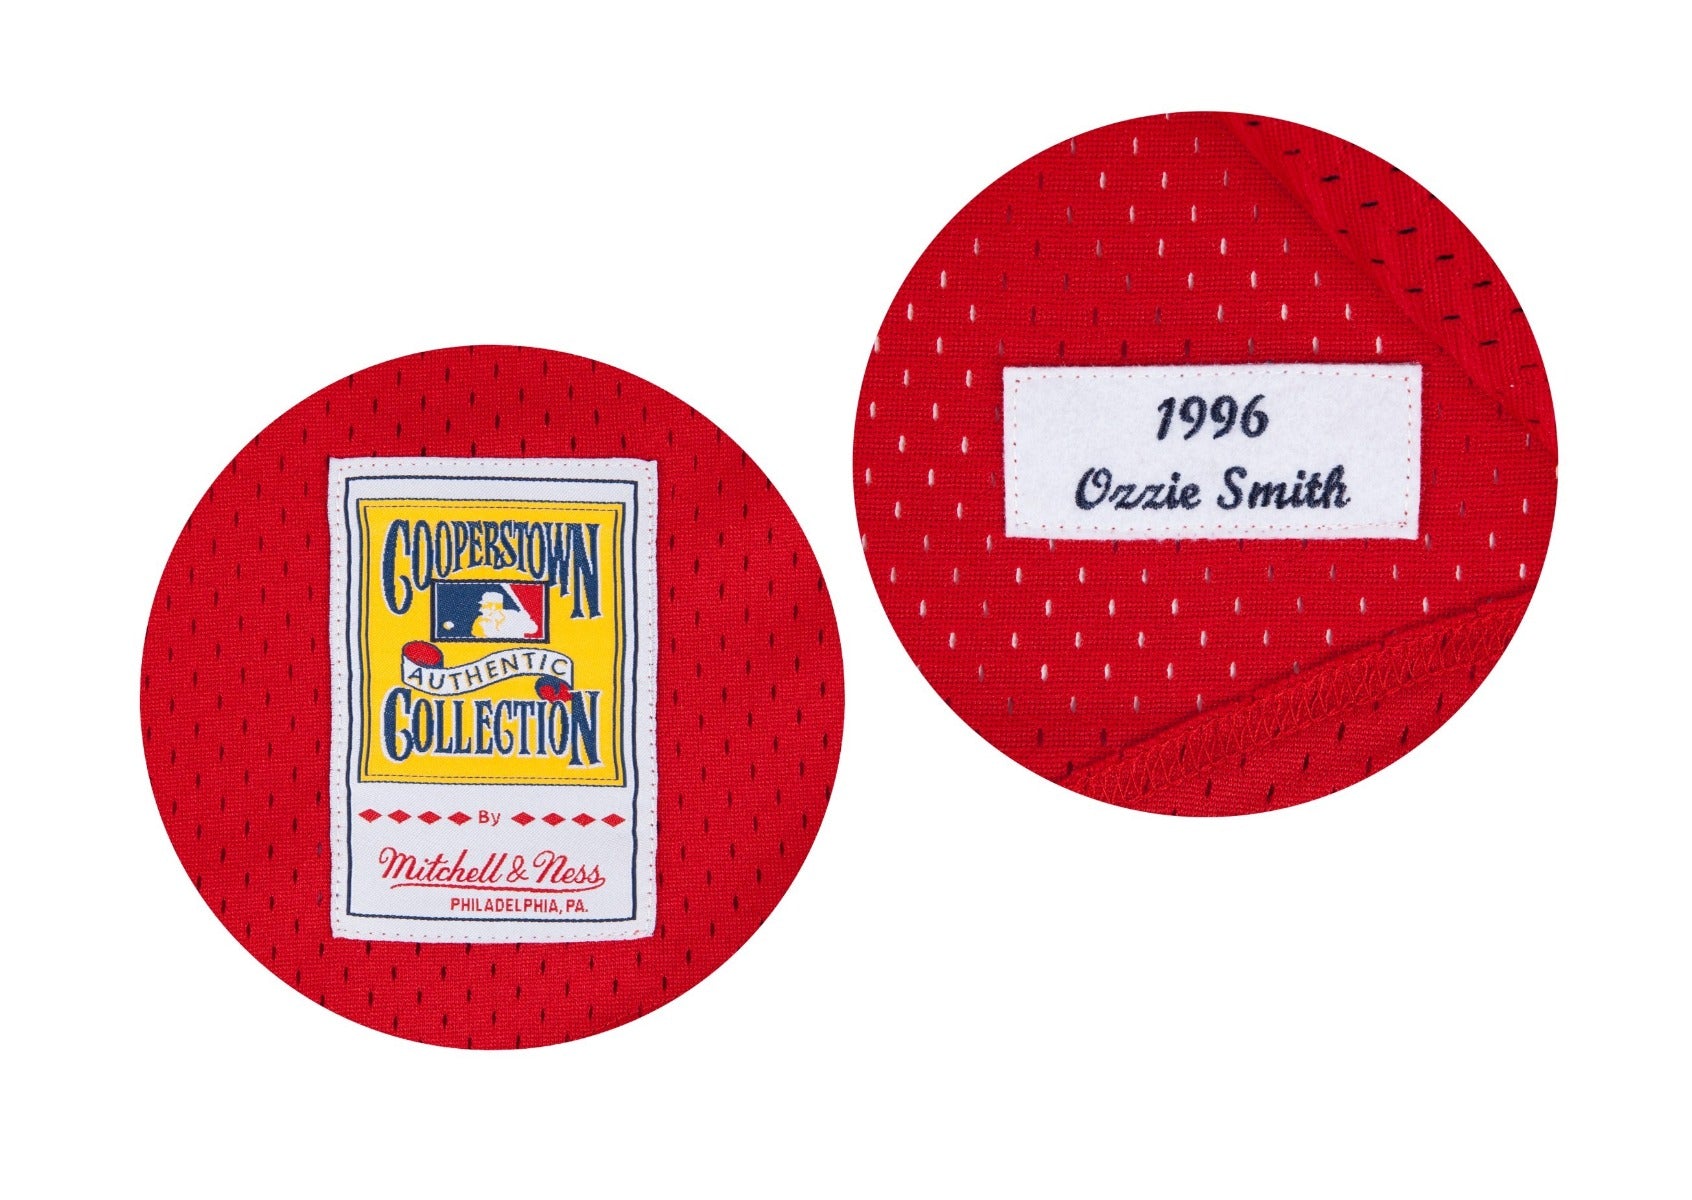 Ozzie Smith St. Louis Cardinals Mitchell & Ness Cooperstown Mesh